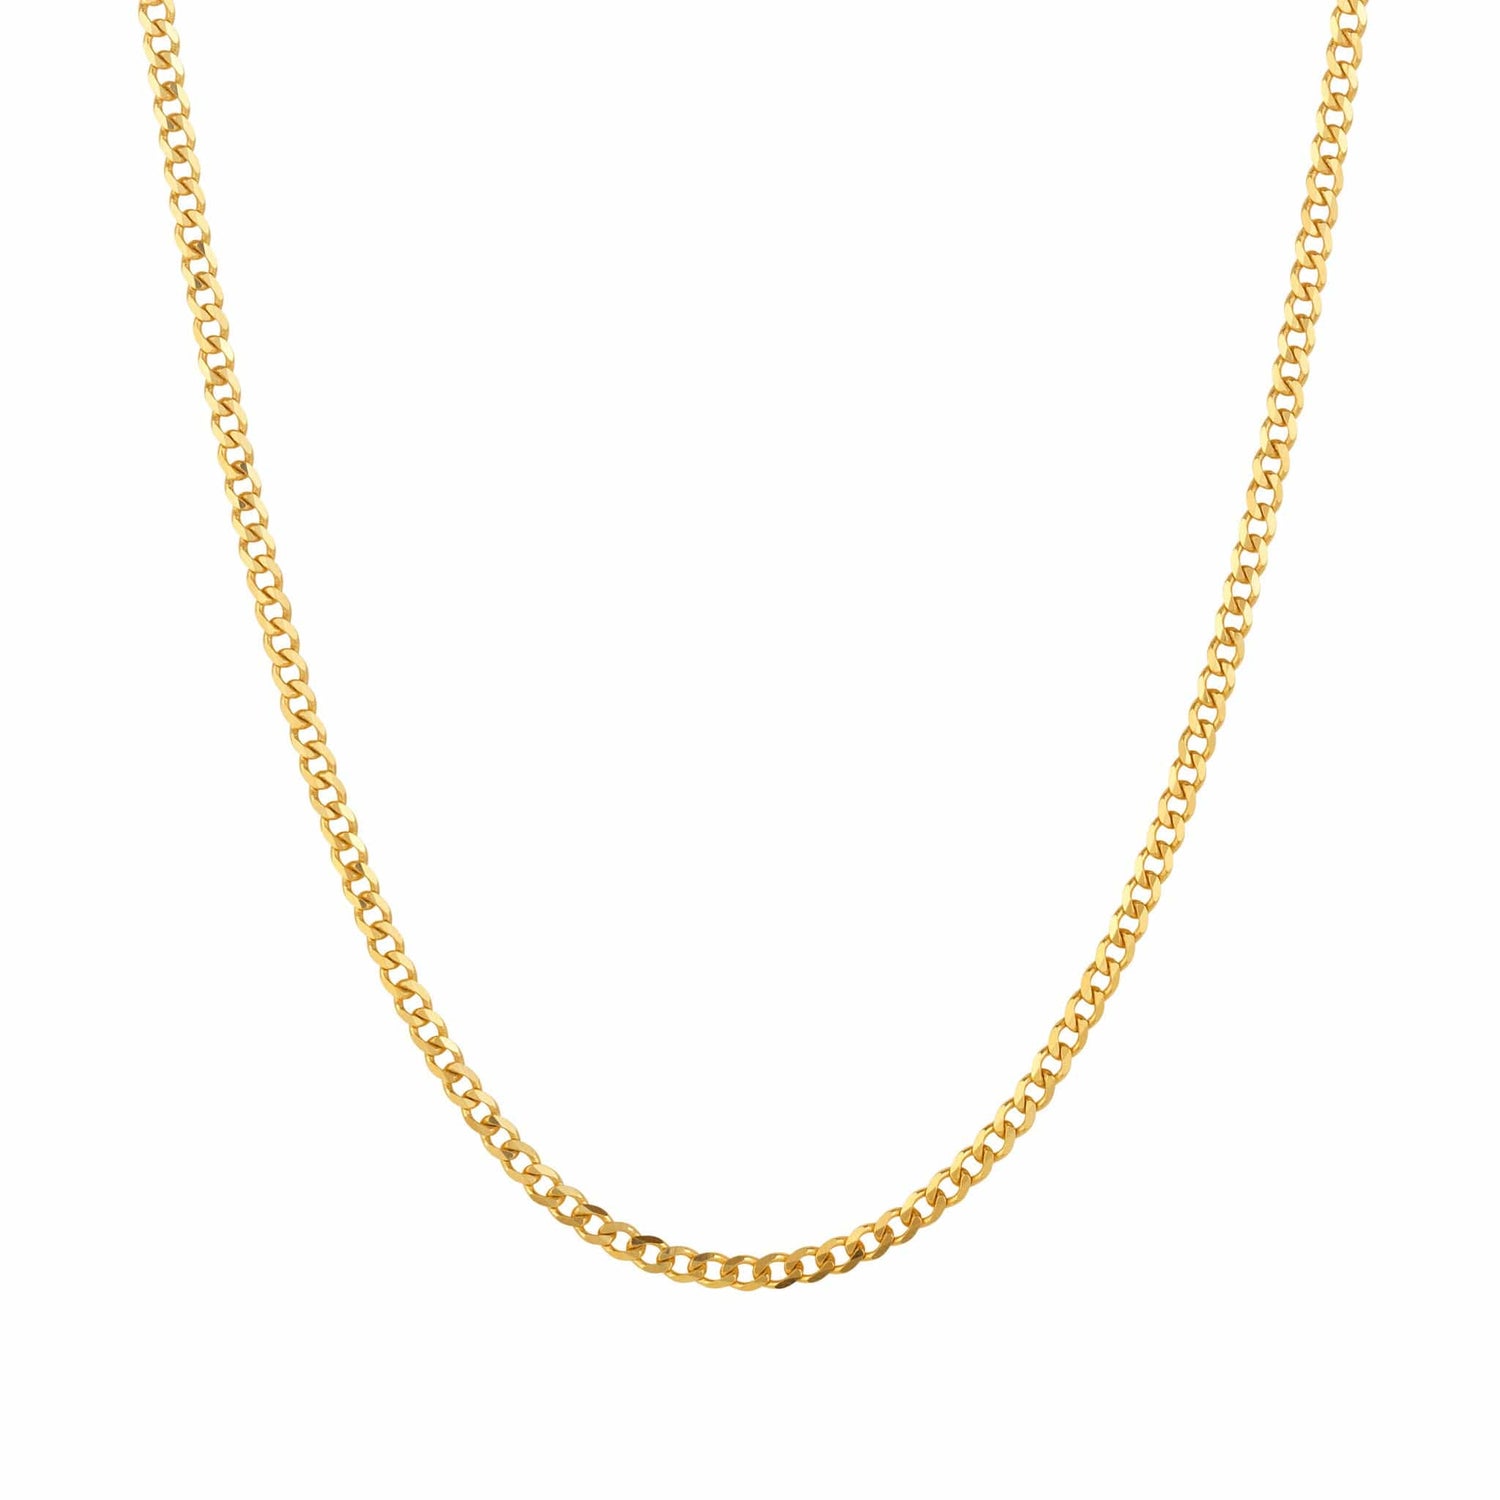 A thin curb chain necklace in polished gold, laid out against a plain background.